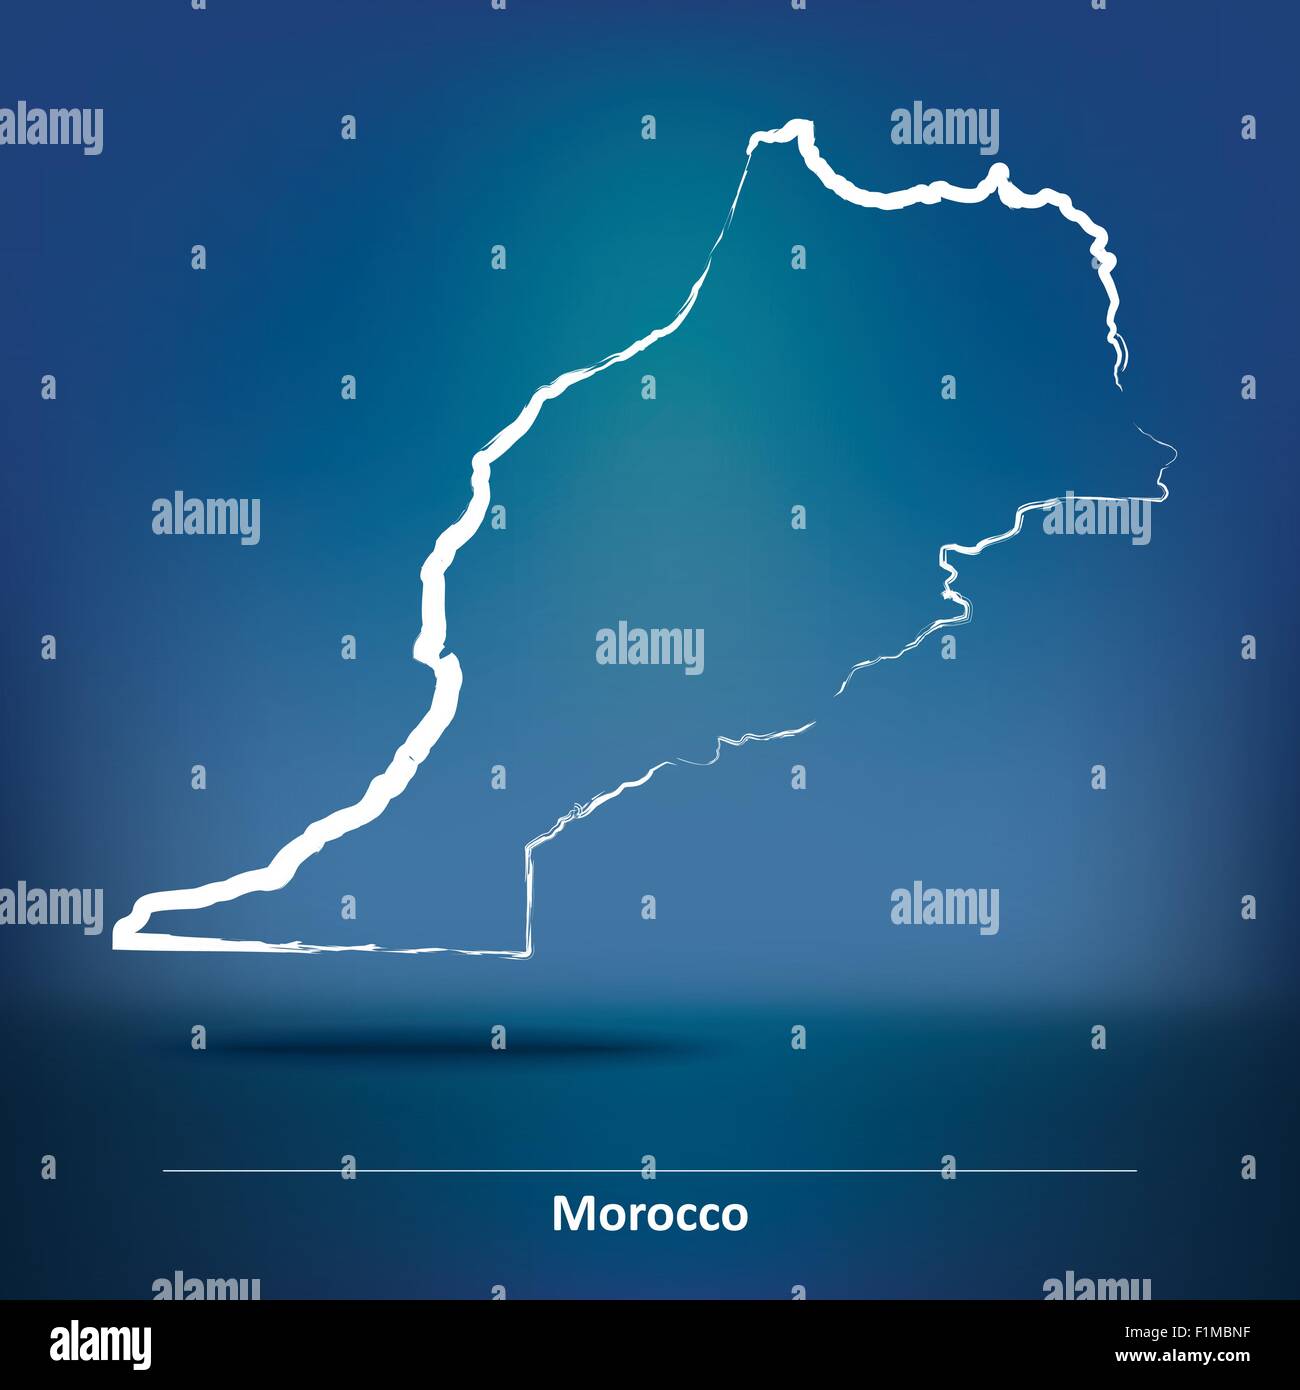 Doodle Map of Morocco - vector illustration Stock Vector